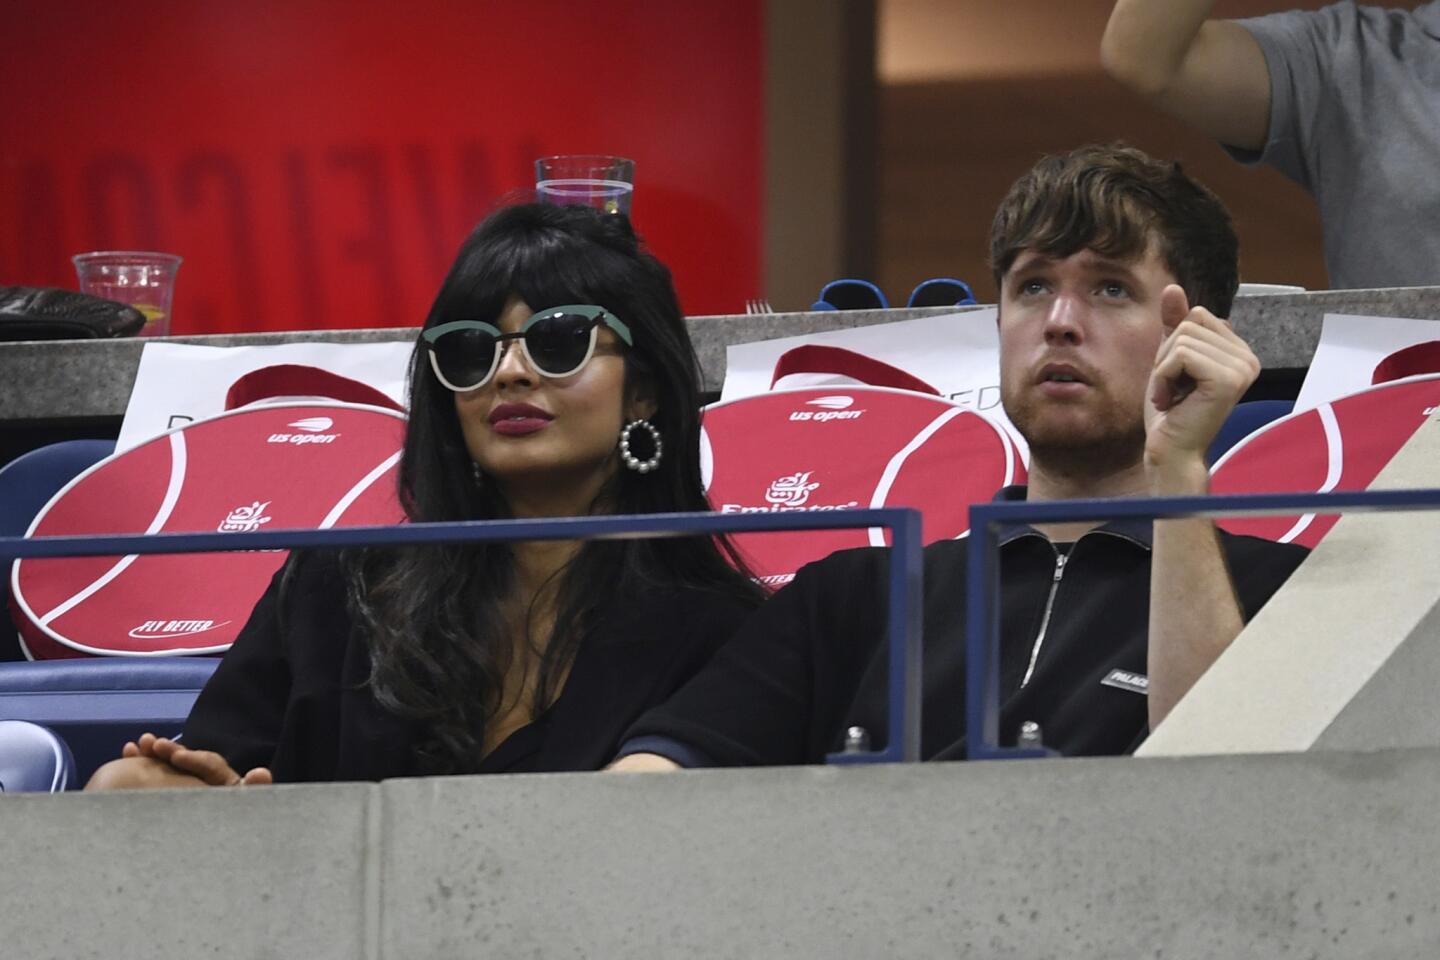 Jameela Jamil and beau singer James Blake watch Serena Williams vs. Quing Wang on Arthur Ashe Stadium at the USTA Billie Jean King National Tennis Center on Sept. 3, 2019, in Flushing, Queens.